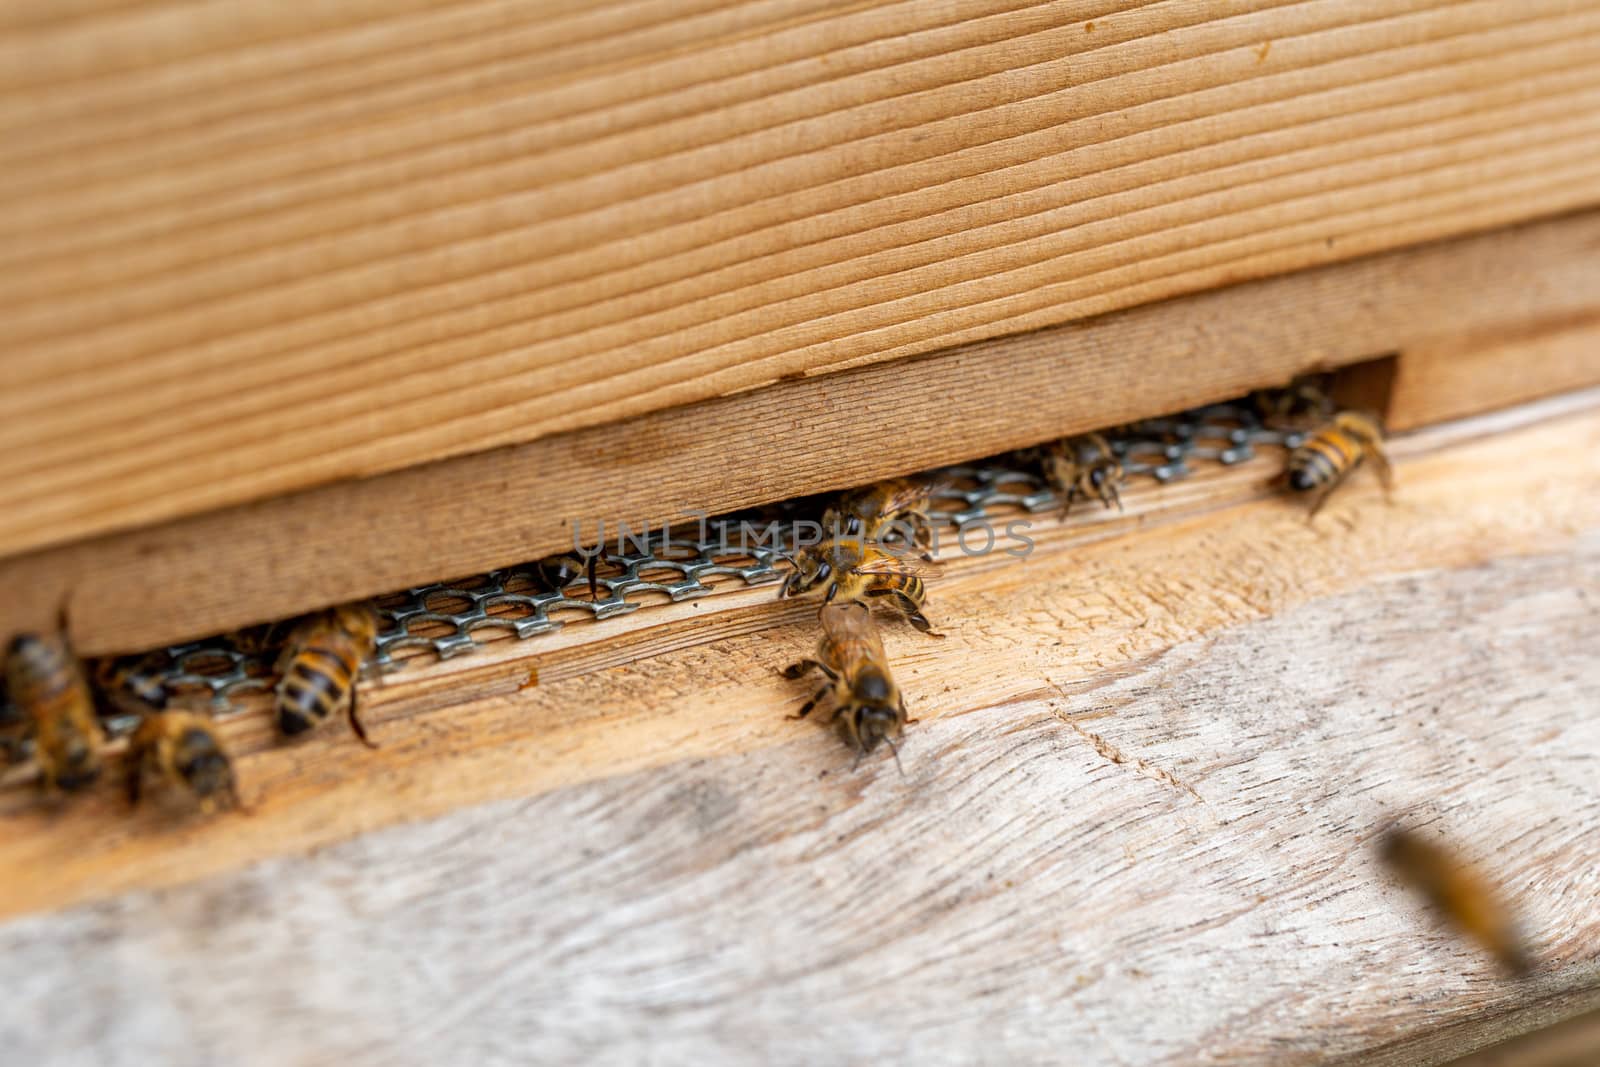 Bees on a wooden beehive in a UK garden by magicbones